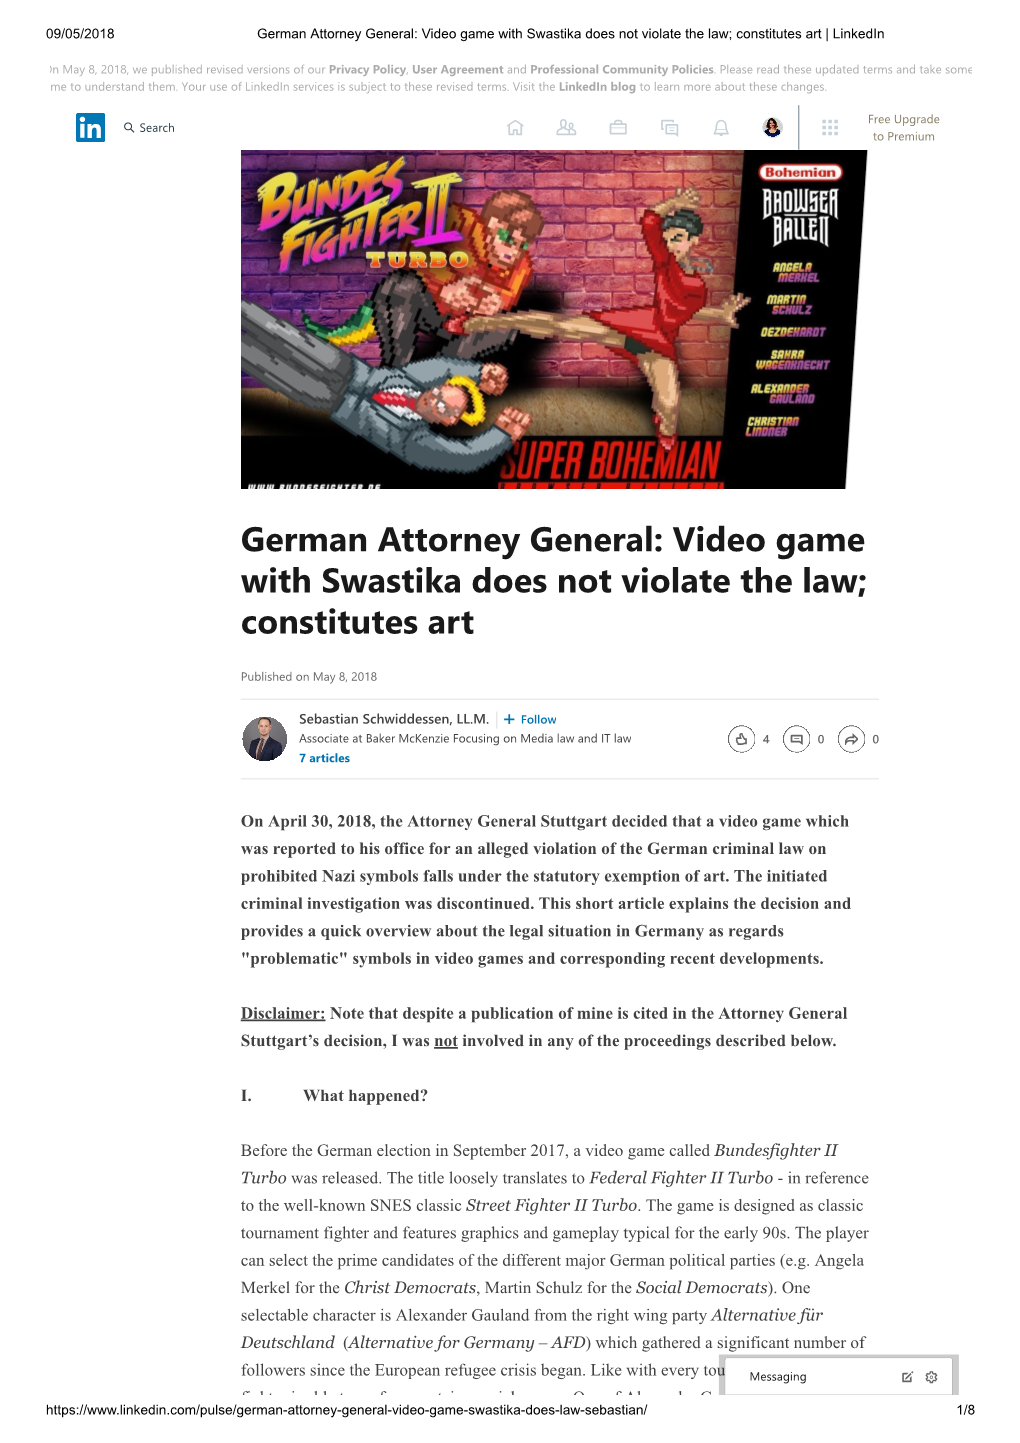 German Attorney General: Video Game with Swastika Does Not Violate the Law; Constitutes Art | Linkedin